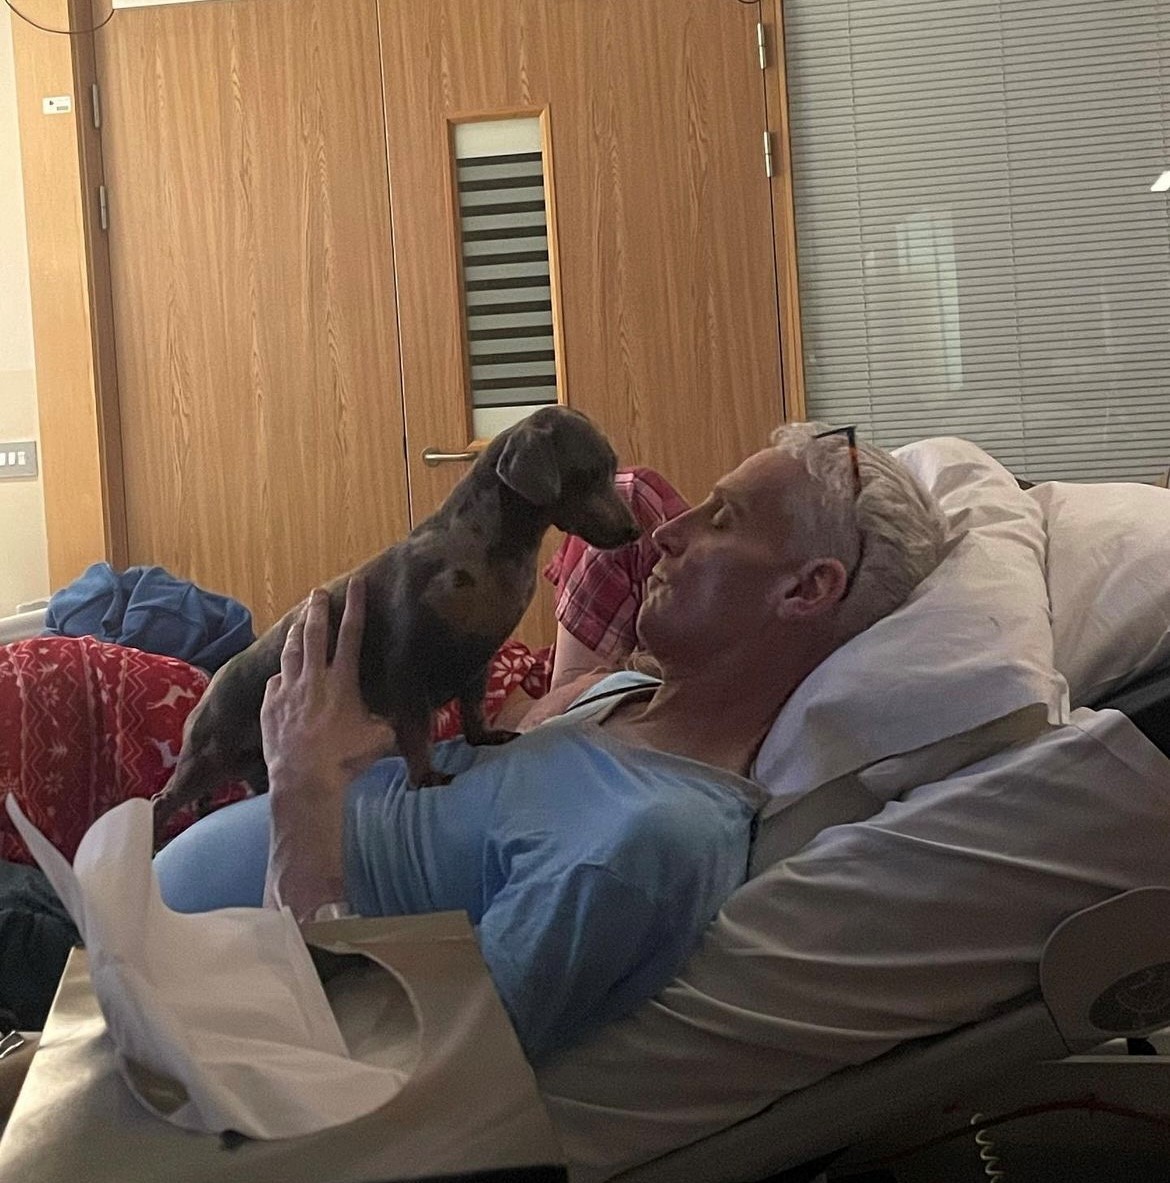 Meet Kieran Monaghan, a man who cherished his family and his 12 furry friends. Thanks to our dedicated Care Team, moments of comfort weren't just for him, but for his loved ones too. 💜 Read how Hospice made a difference: brnw.ch/21wJ7V9 #CreatingMomentsOfComfort